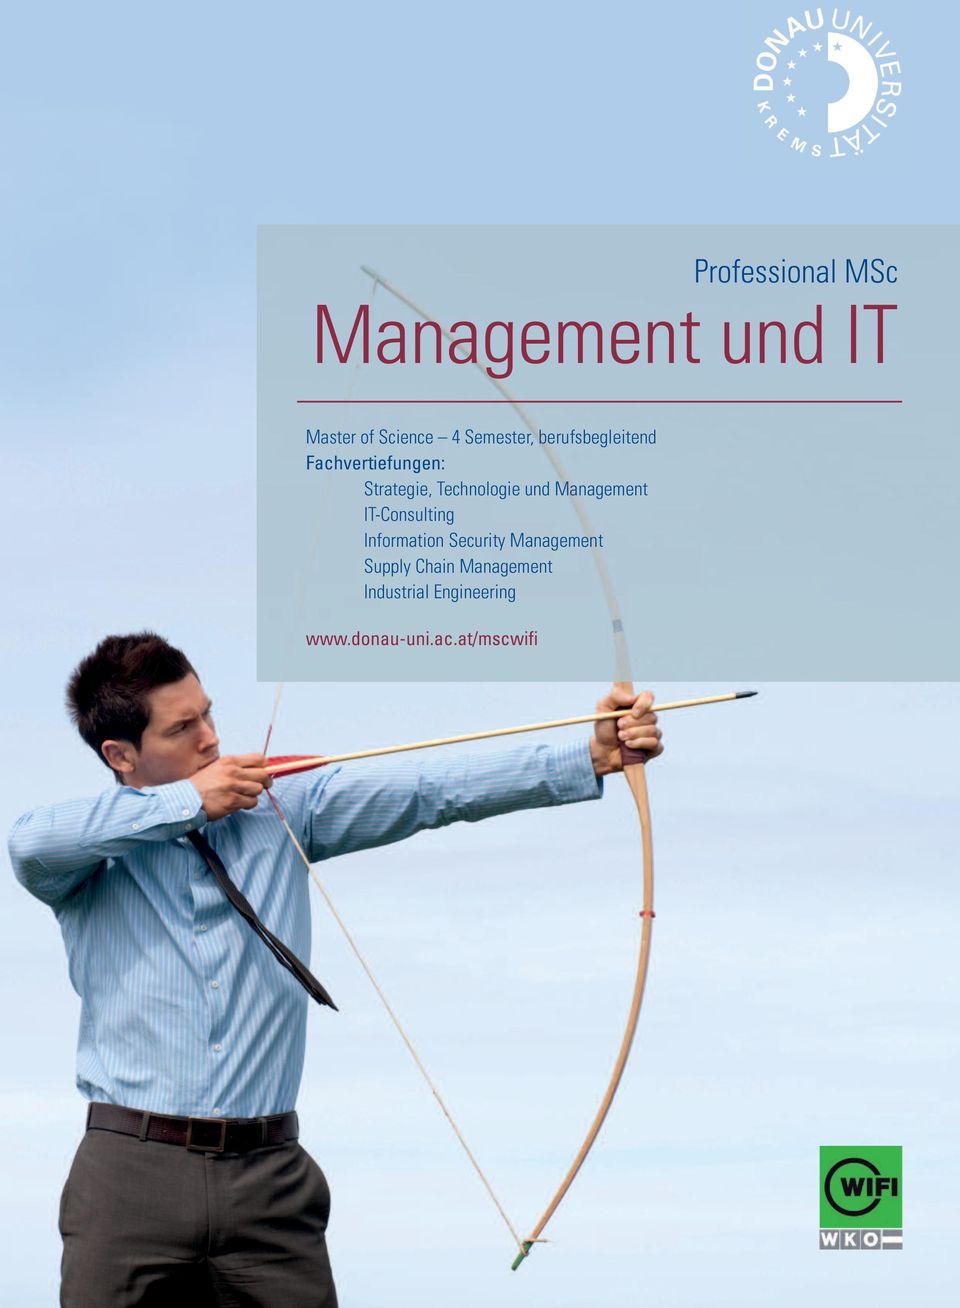 Management IT-Consulting Information Security Management Supply